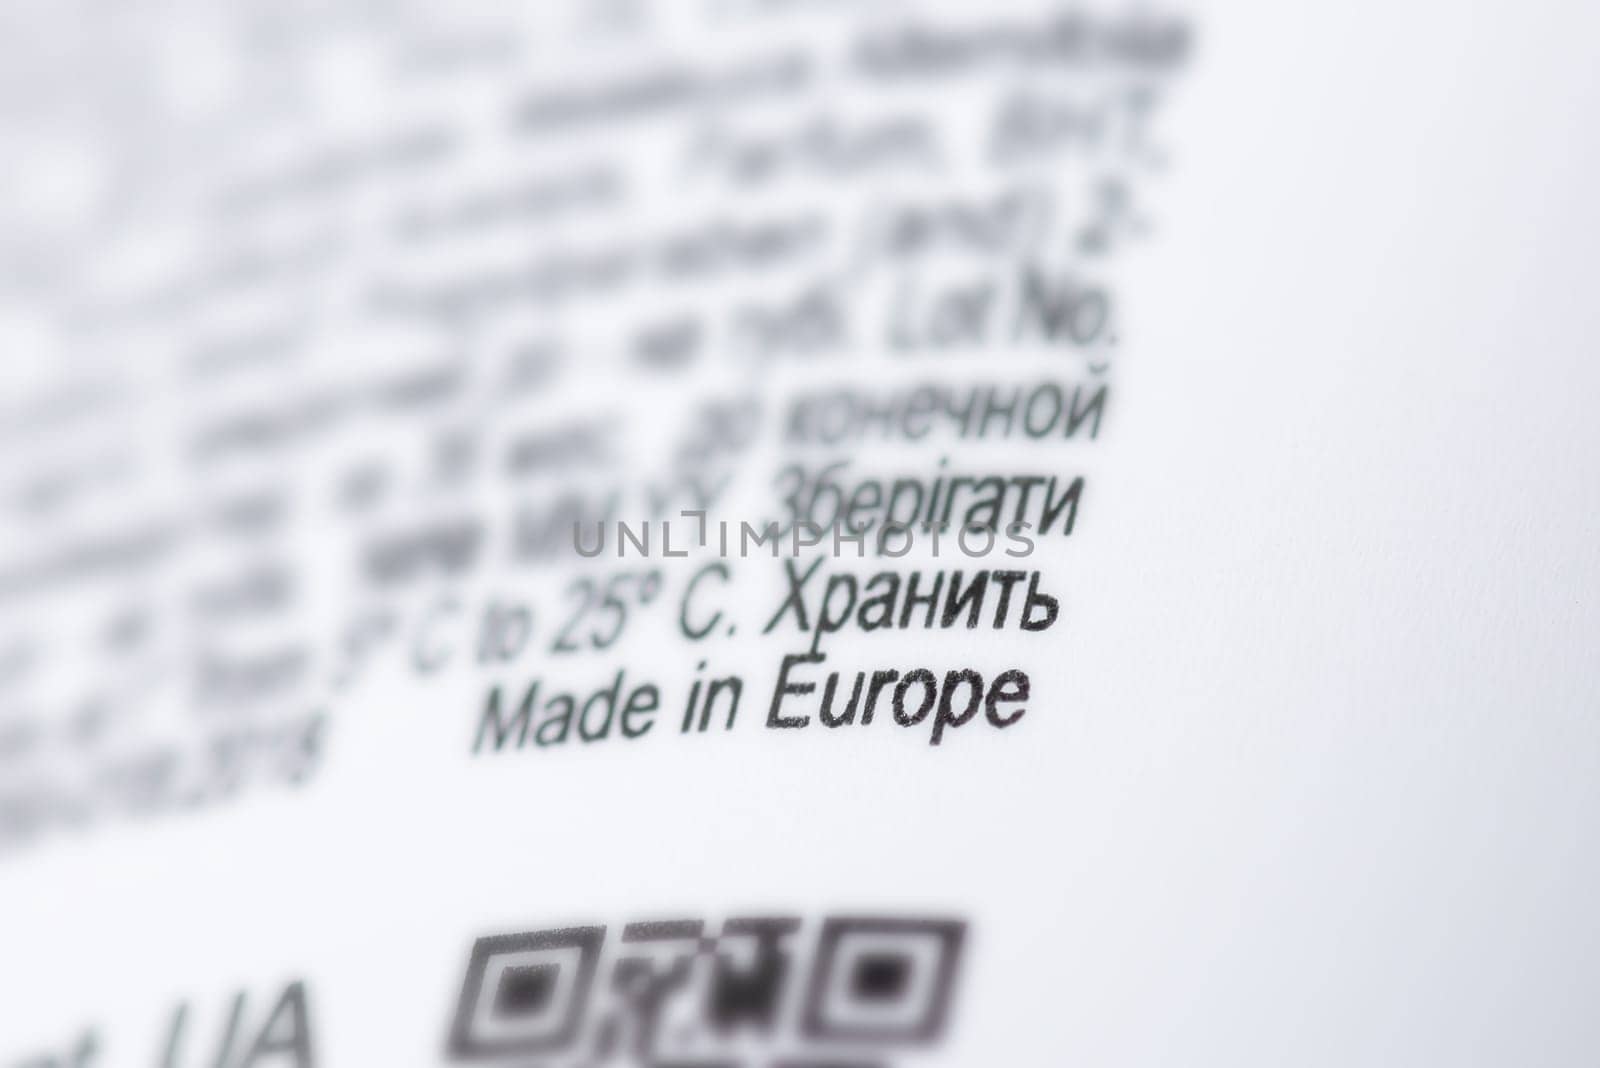 Made in Europe inscription on some tube of cosmetics